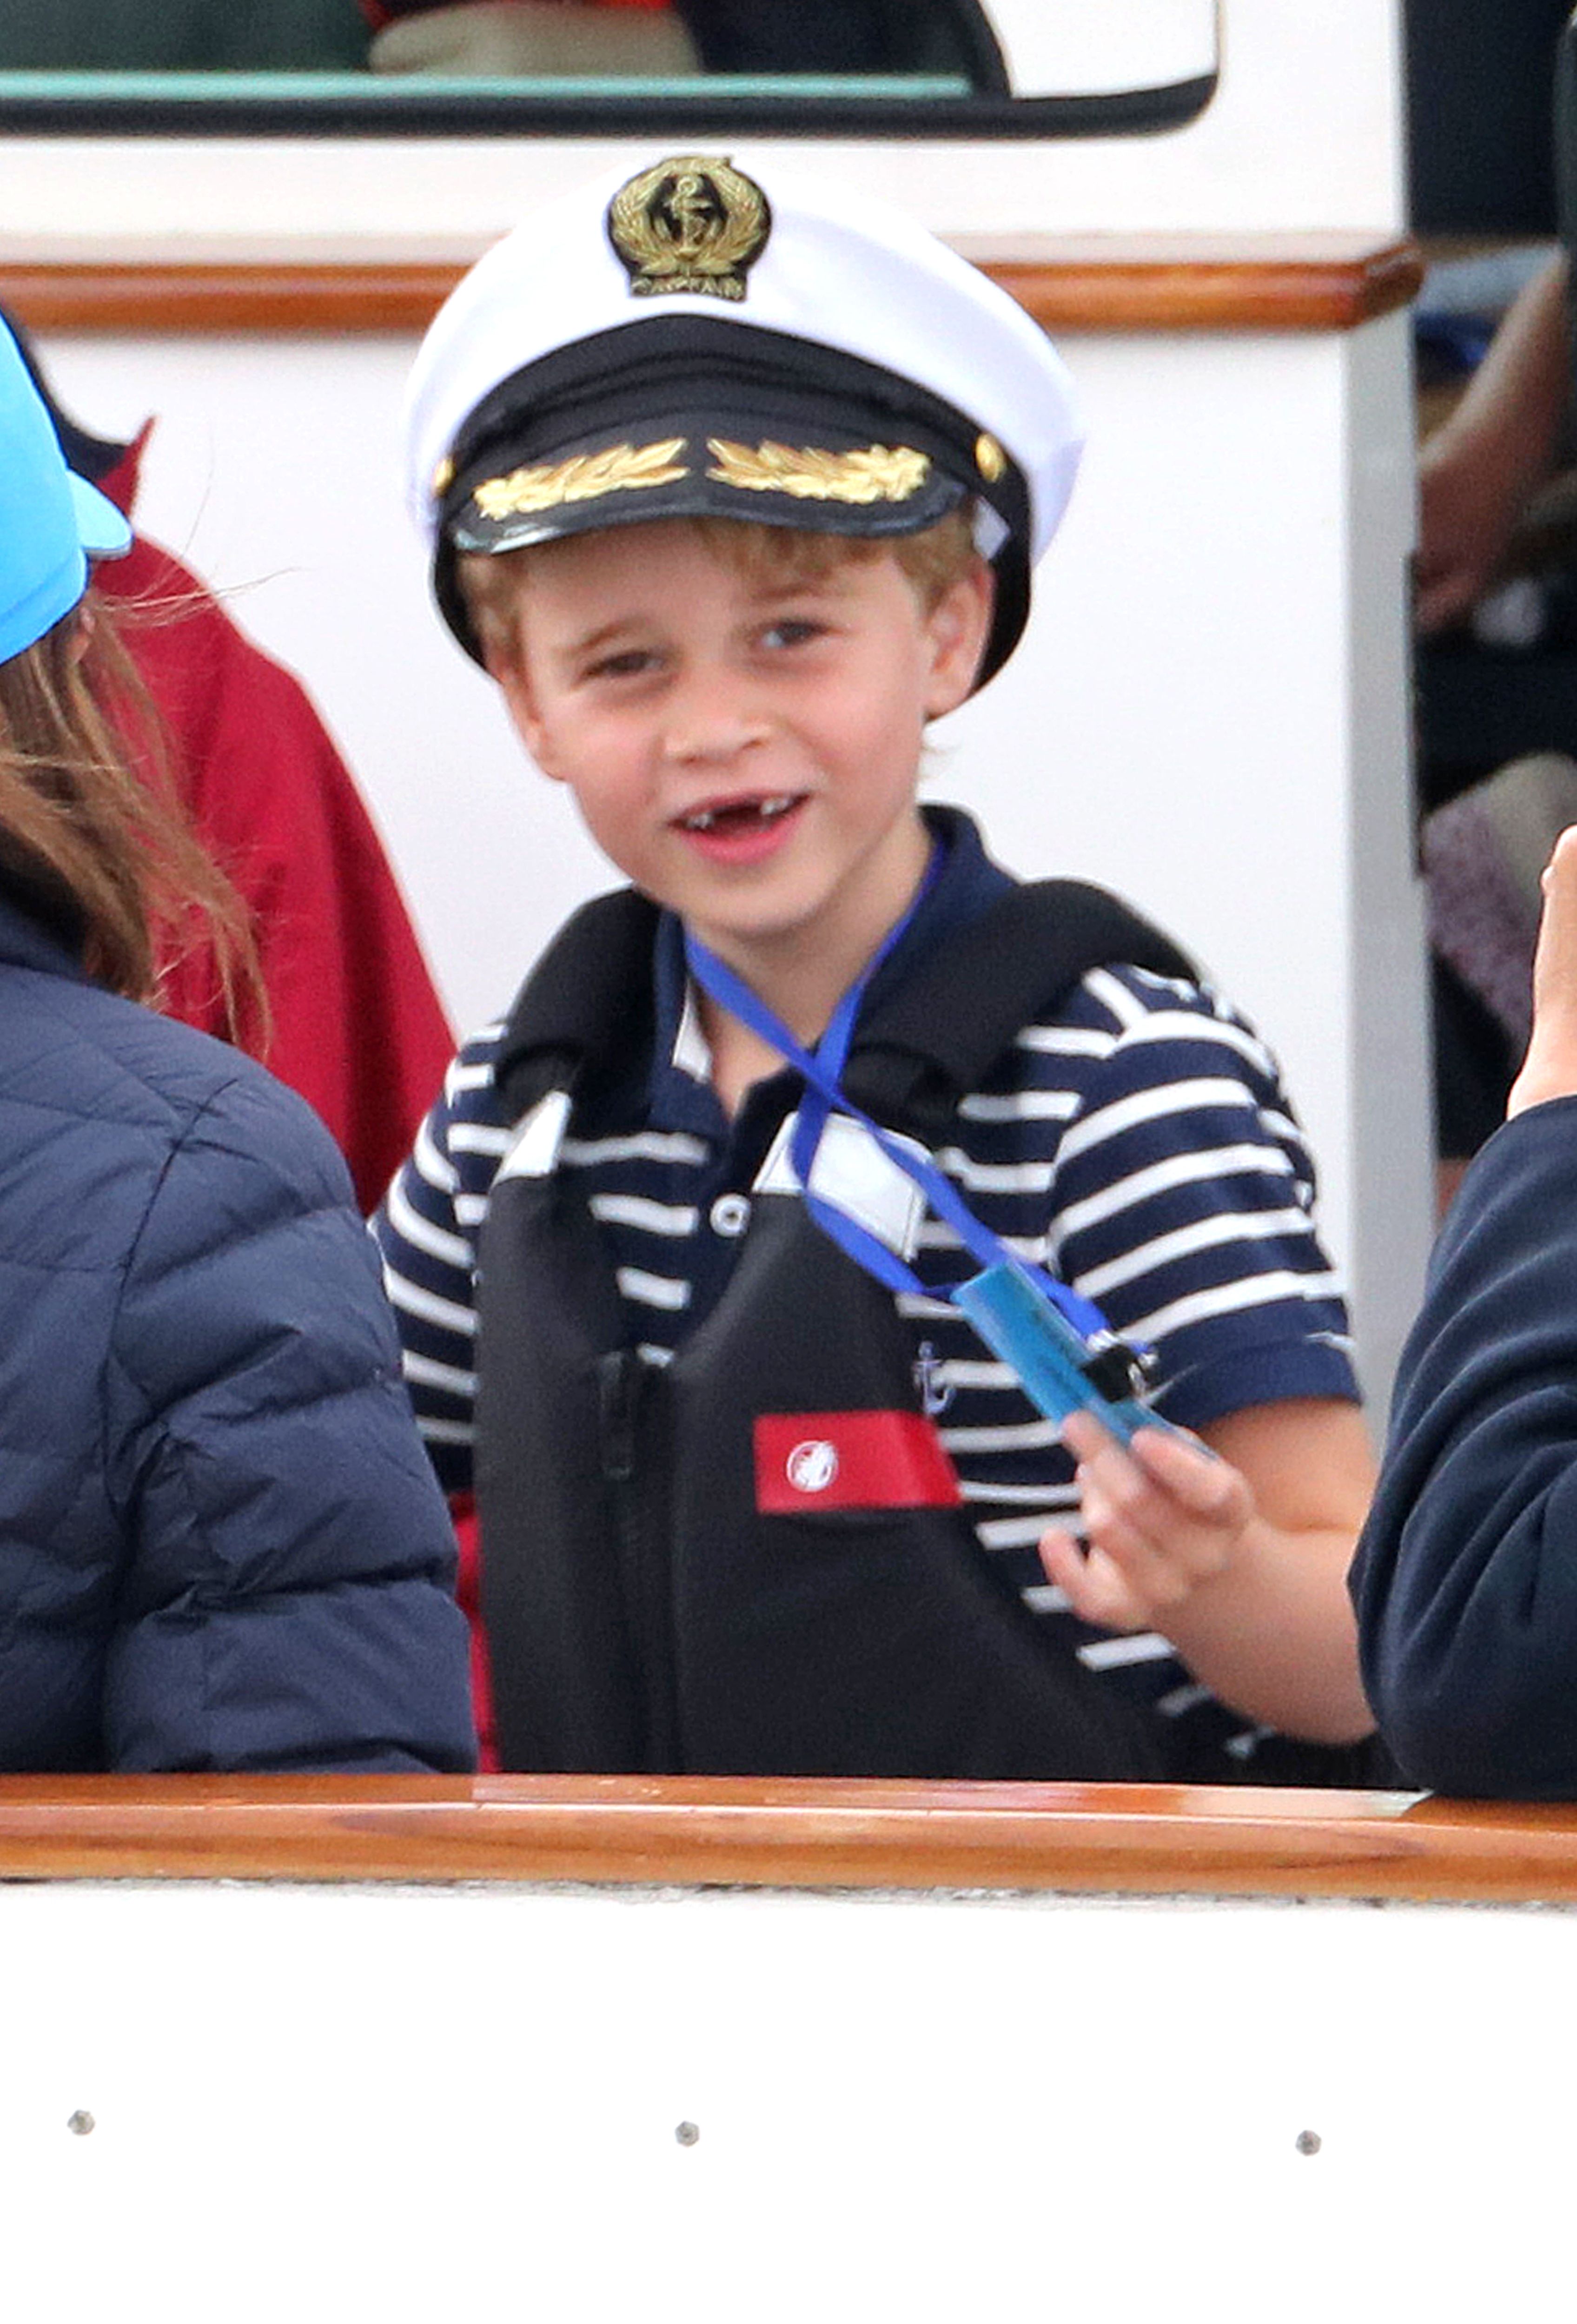 The Duchess of Cambridge's nautical outfit at The King's Cup regatta